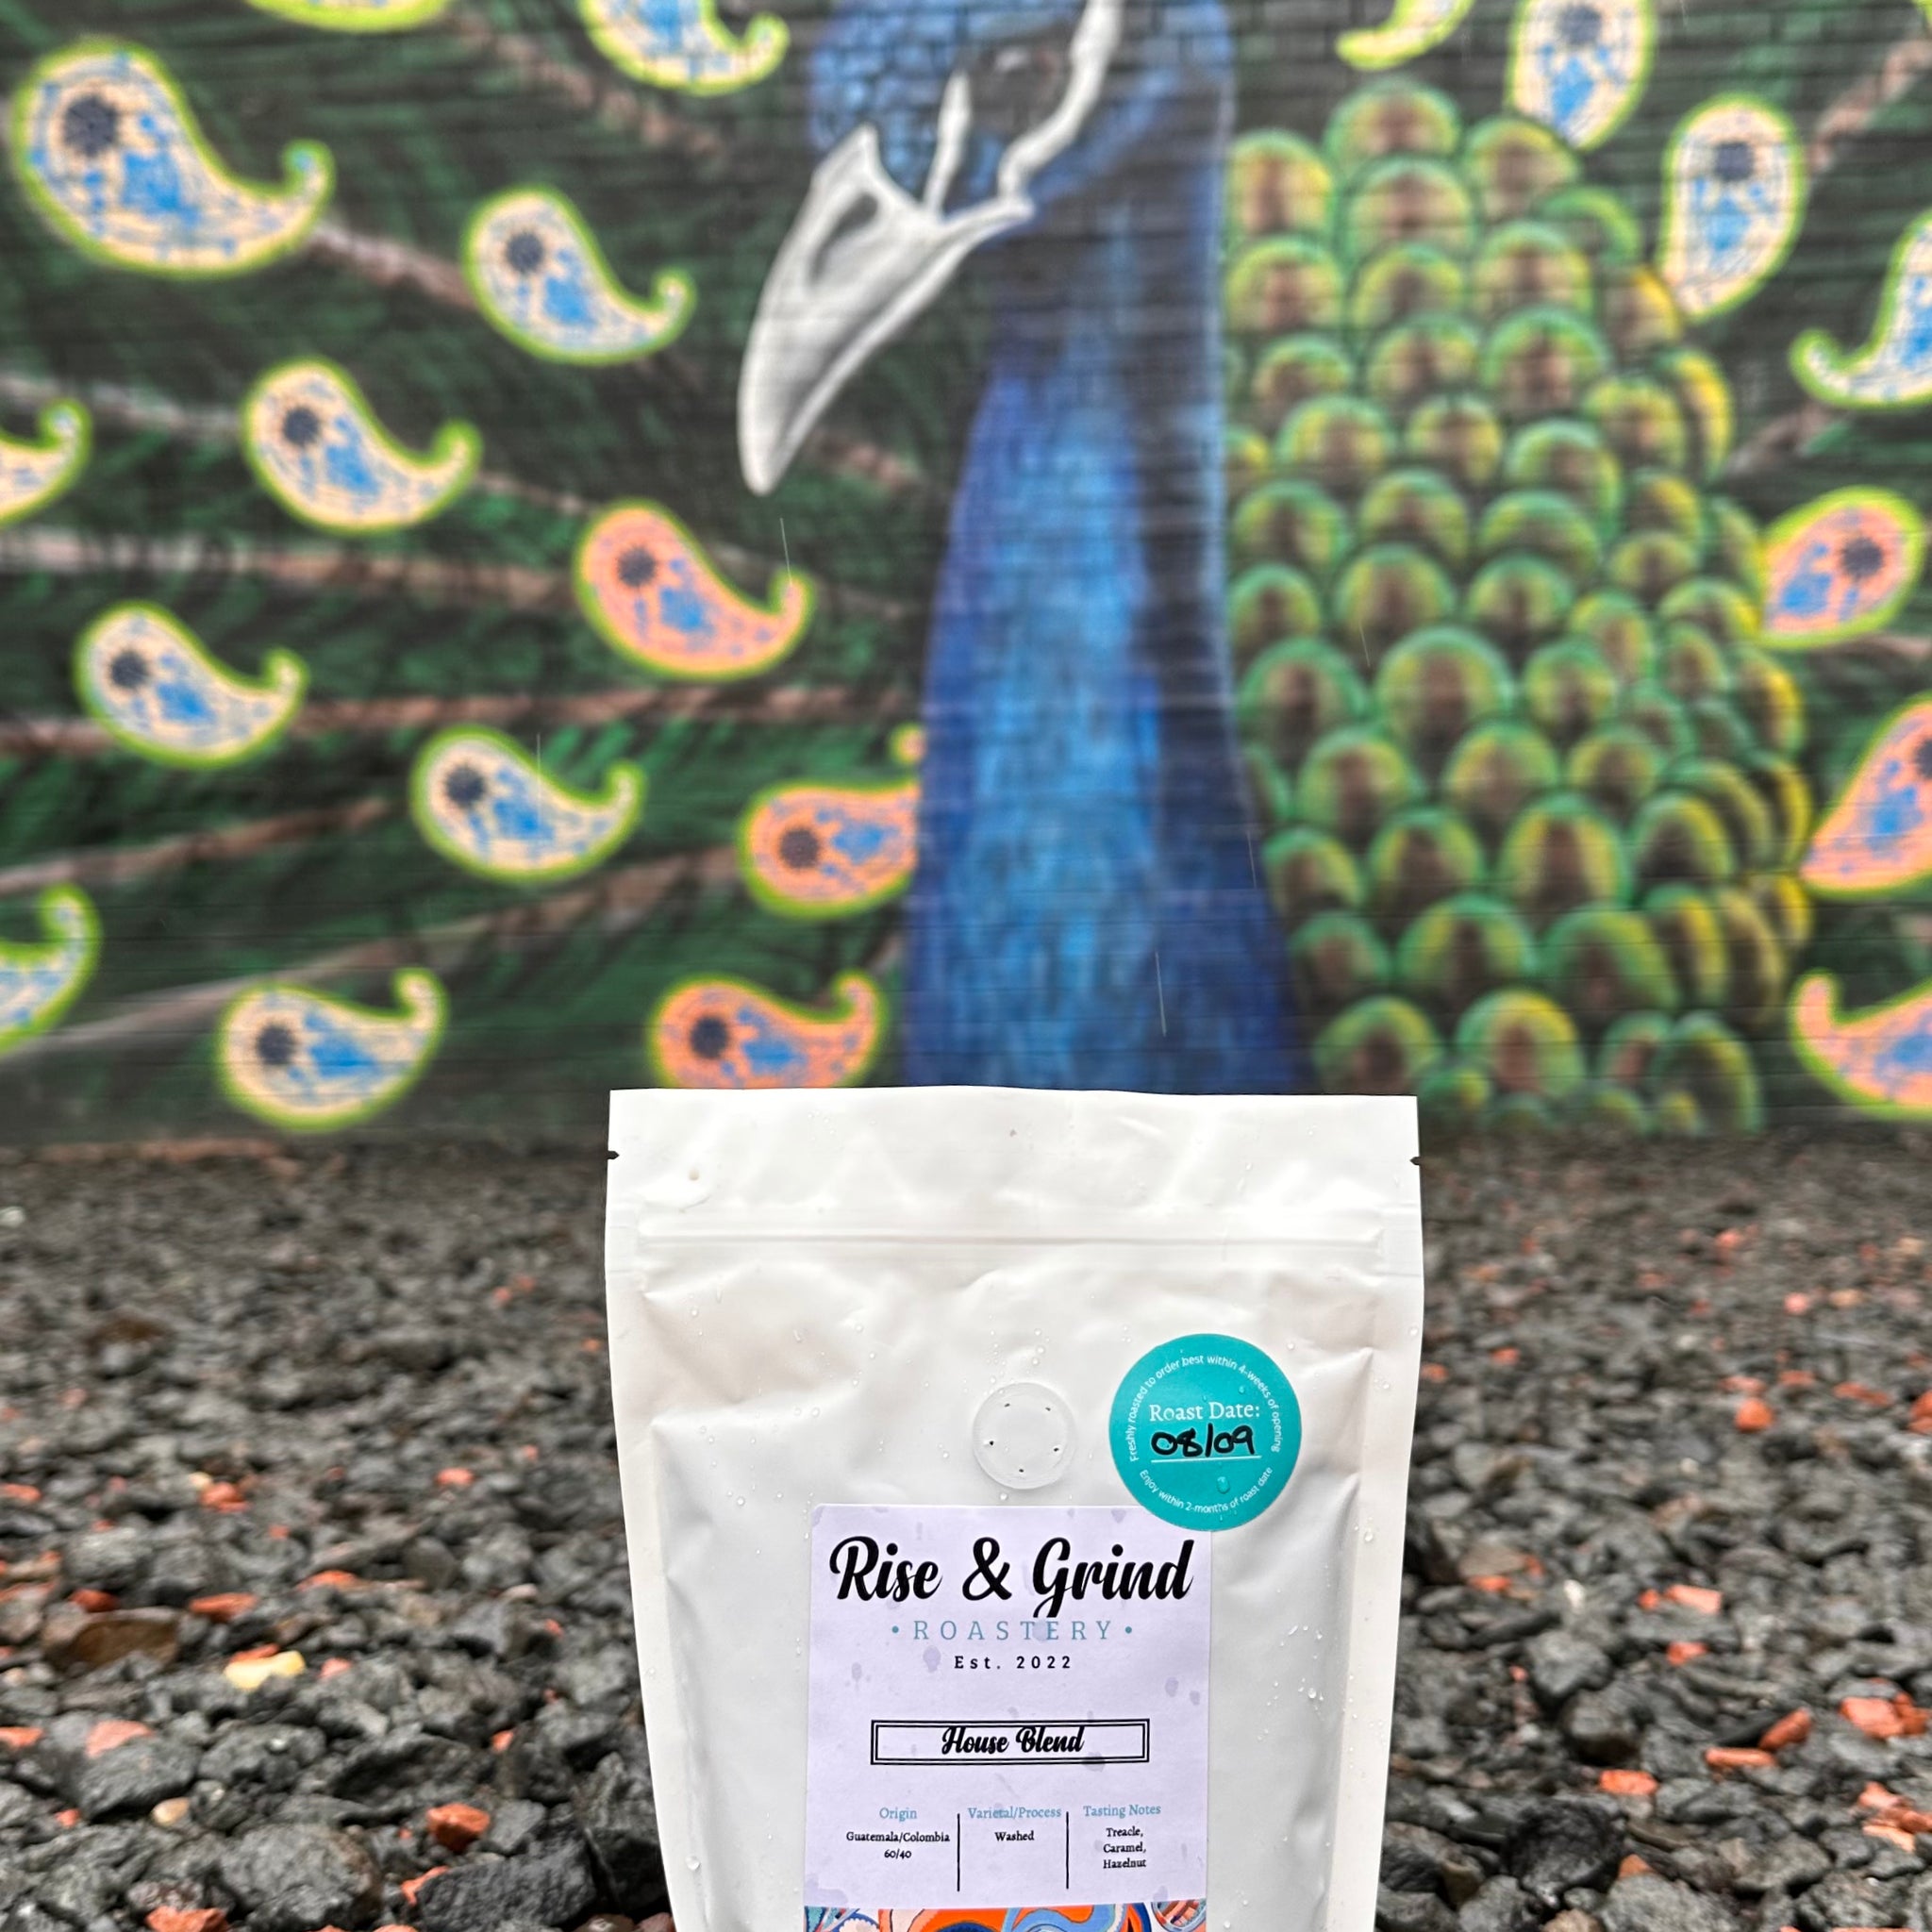 A freshly roasted speciality coffee Blend. Roasted for espresso & filter coffee with notes of chocolate, treacle & caramel. Front retail coffee bag view